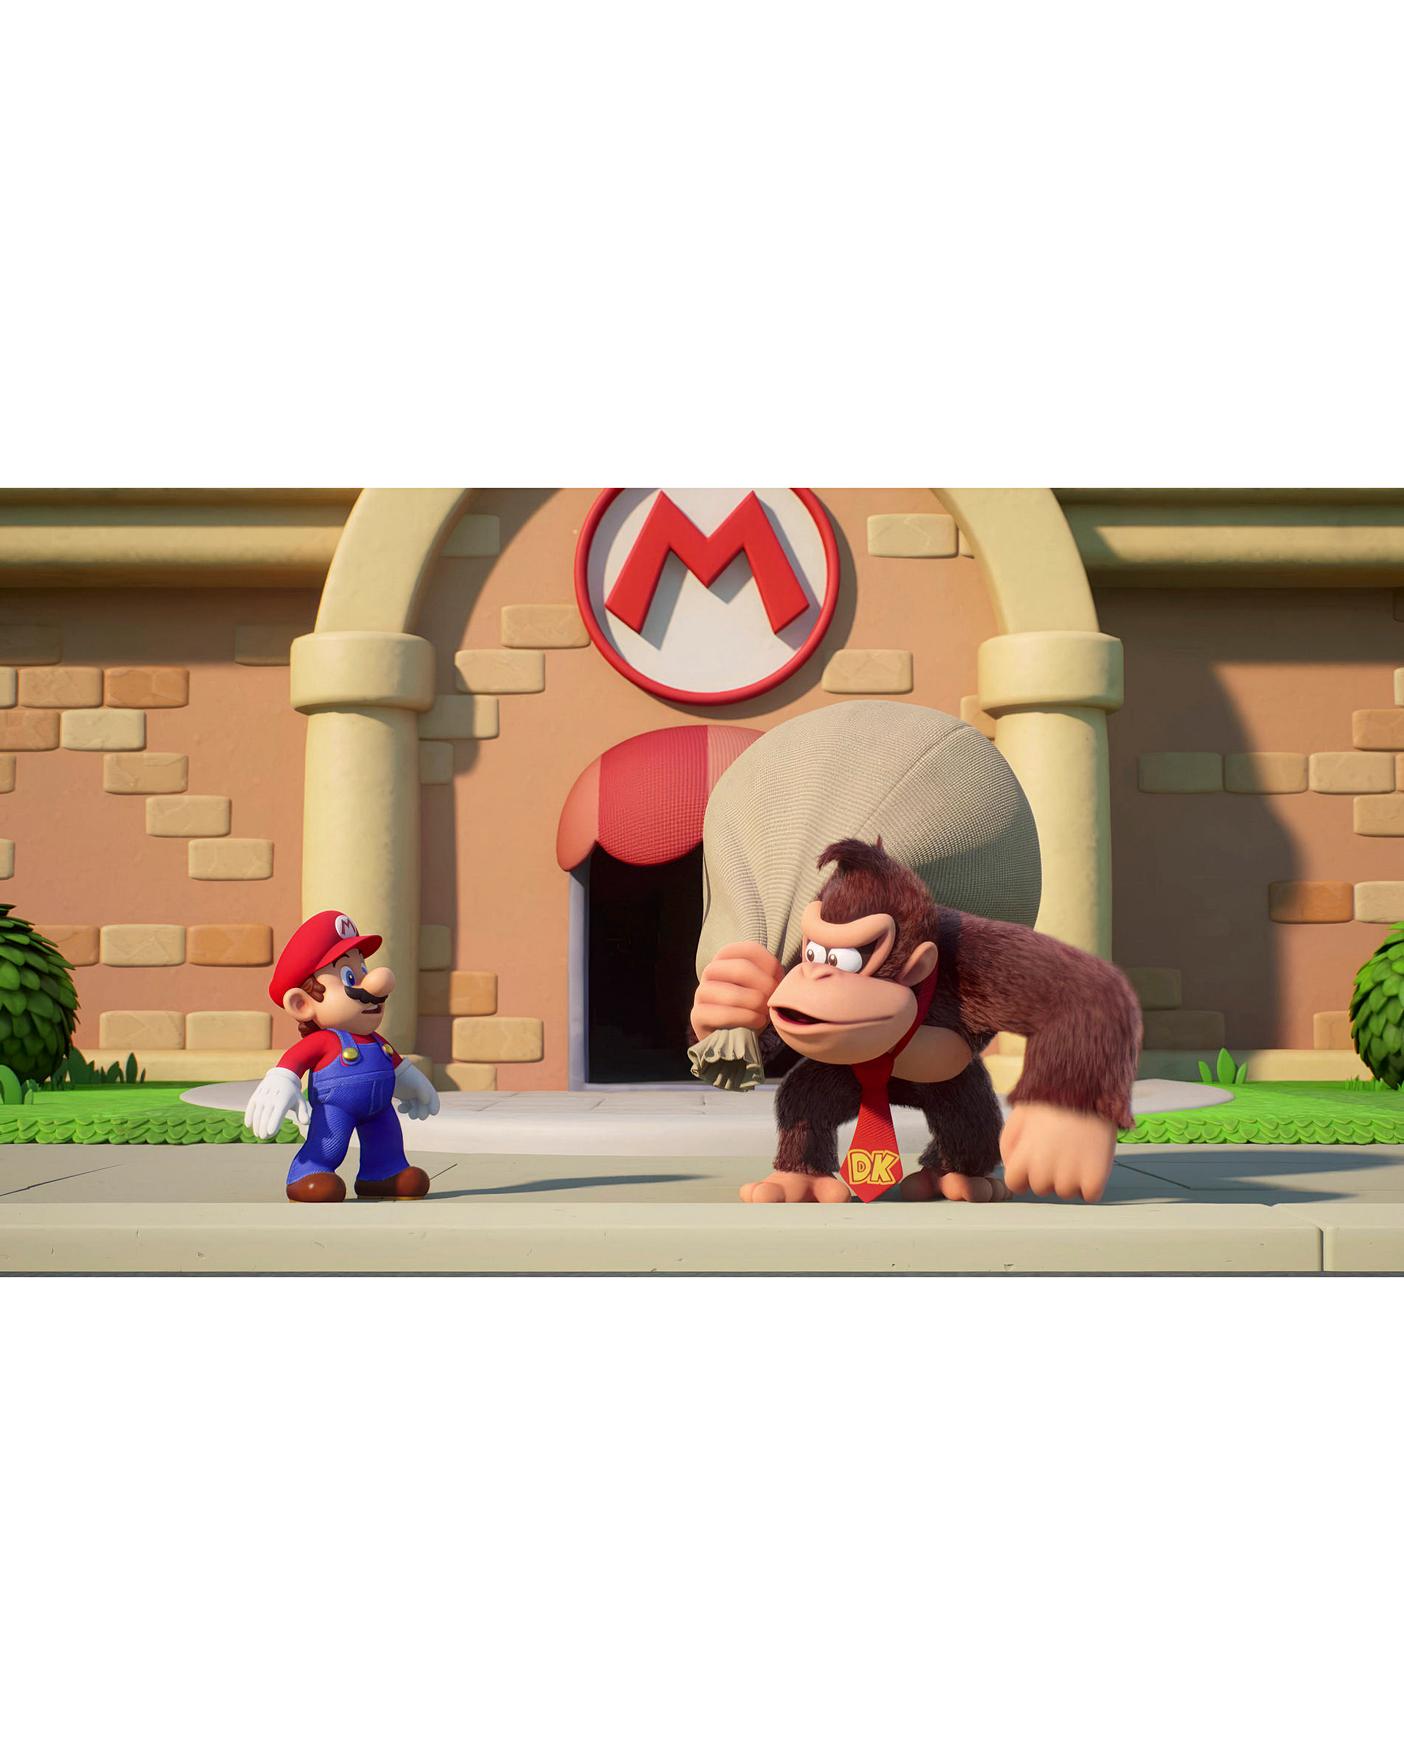 Mario vs. Donkey Kong review: the Switch enters its filler era